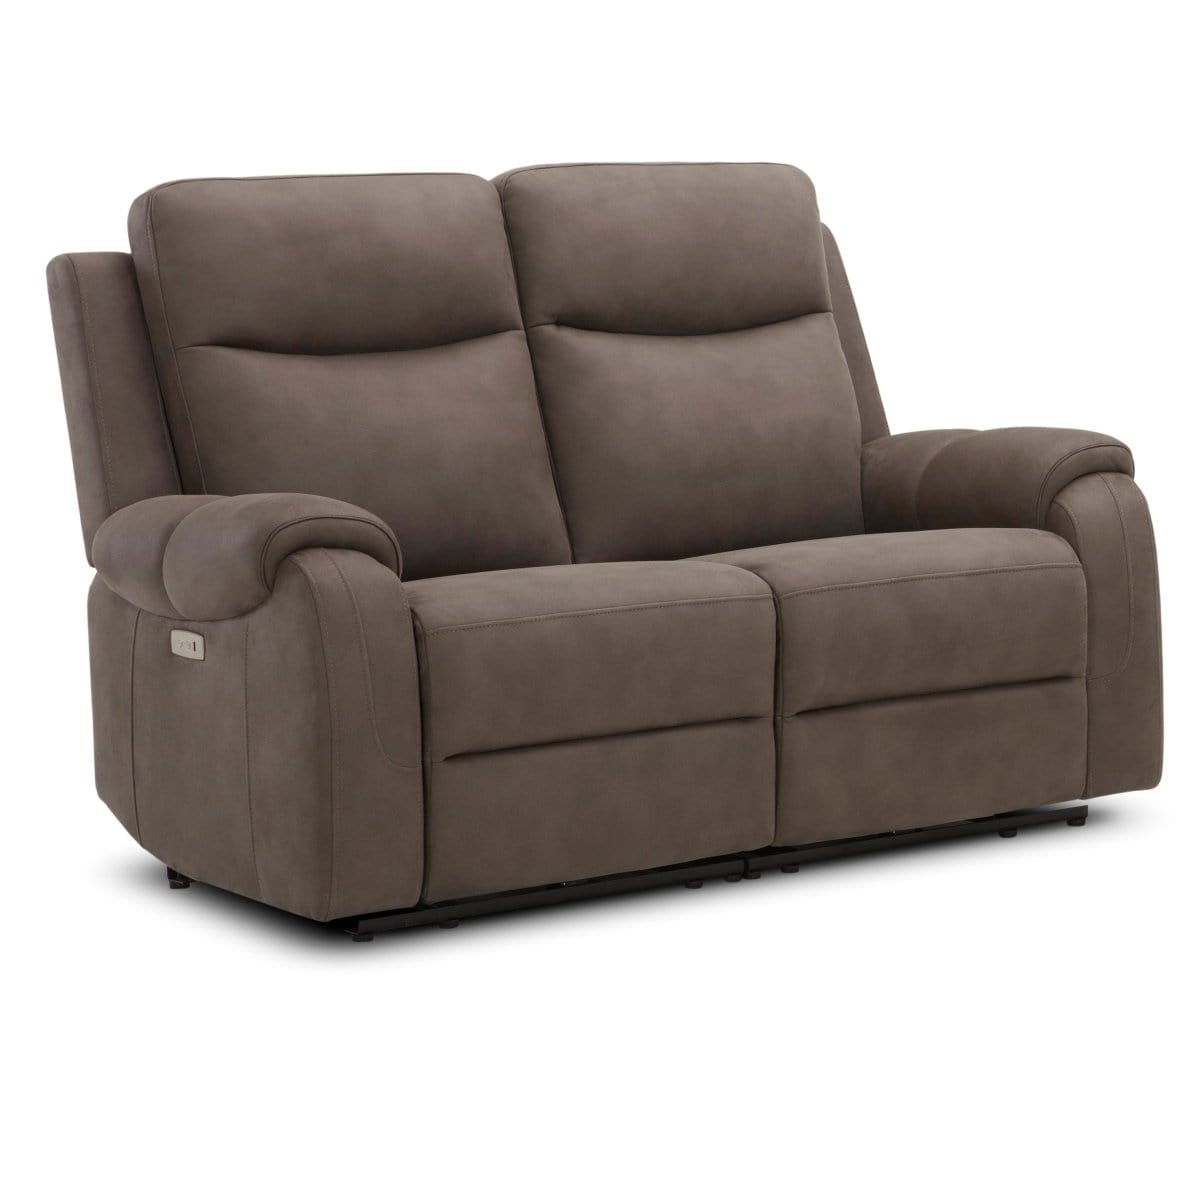 KUKA KM.5118 Electrical Fabric Recliner Sofa (1/2/3-Seater) (Fabric C) (I) picket and rail